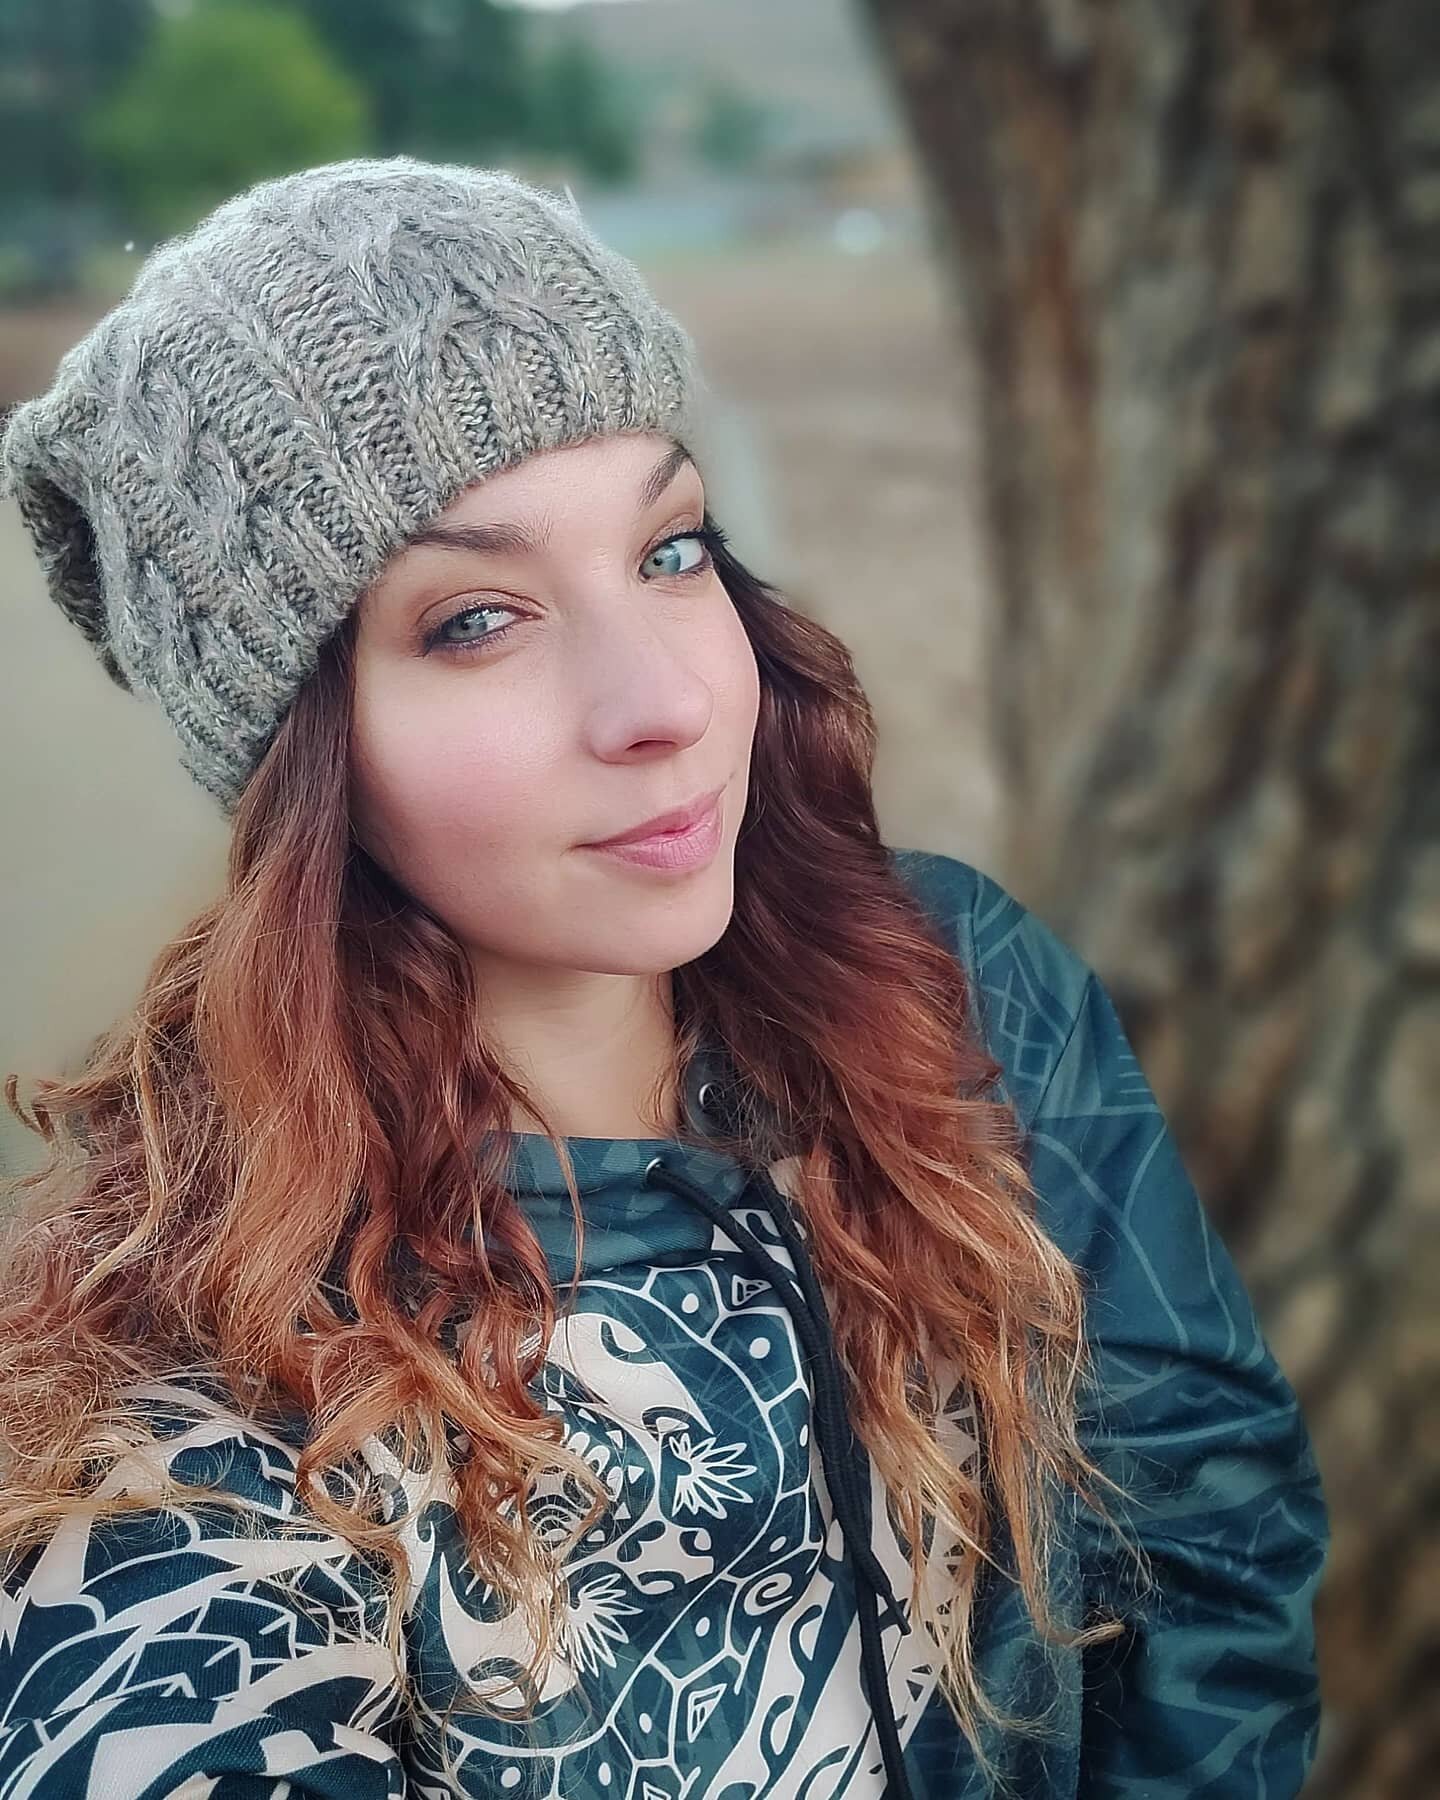 🥰What's up everybody!?I have been renovating and moving into my new home. 💕Next step is setting up my music room so I can start creating again! Hope you all had an awesome weekend &amp; l can't wait to share my new songs!♡Check out my latest single